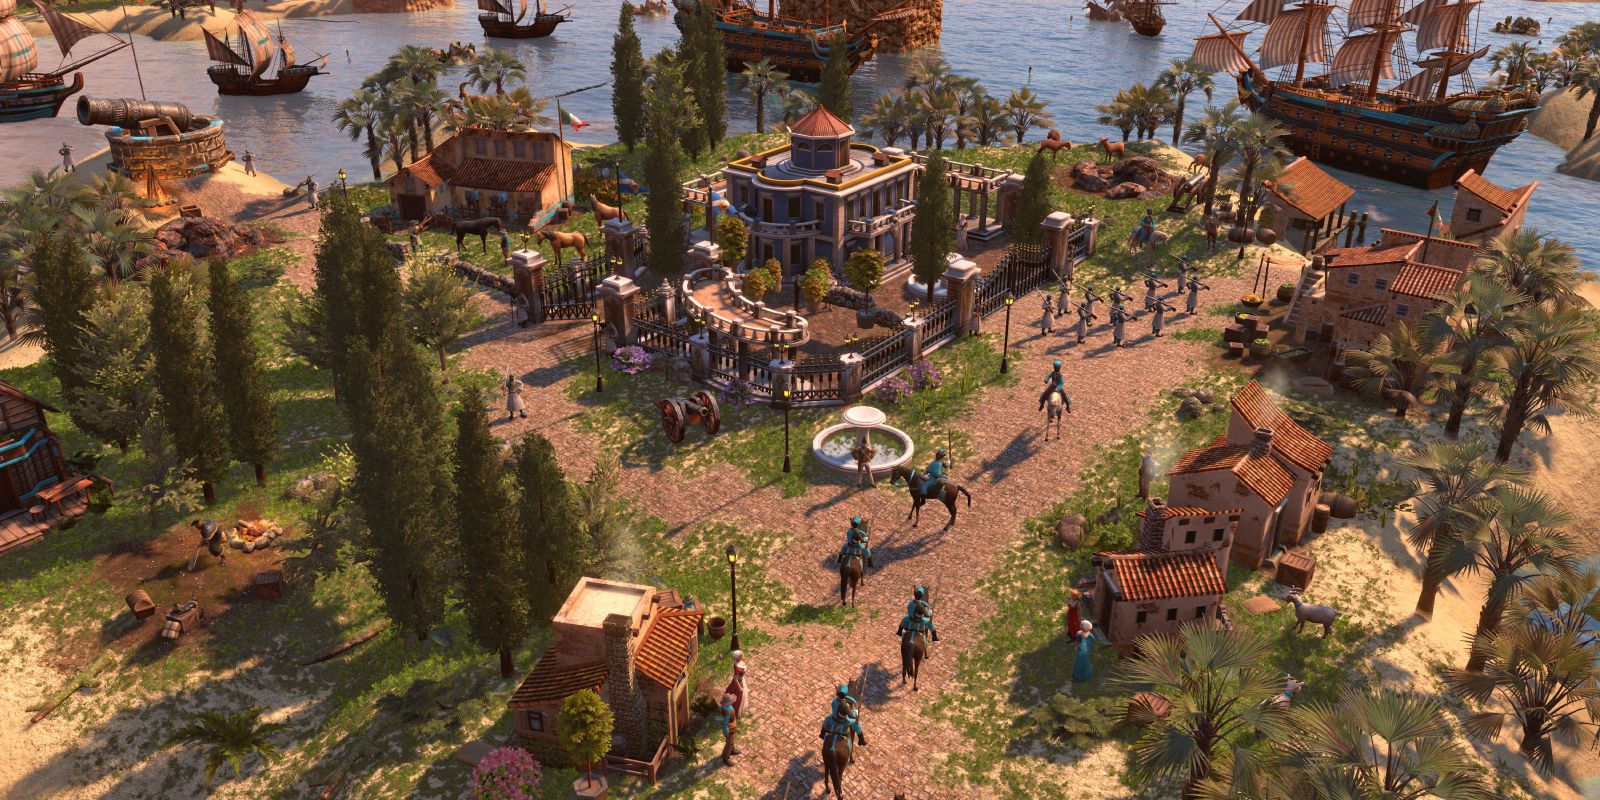 age of empires 3 knights of the mediterranean download